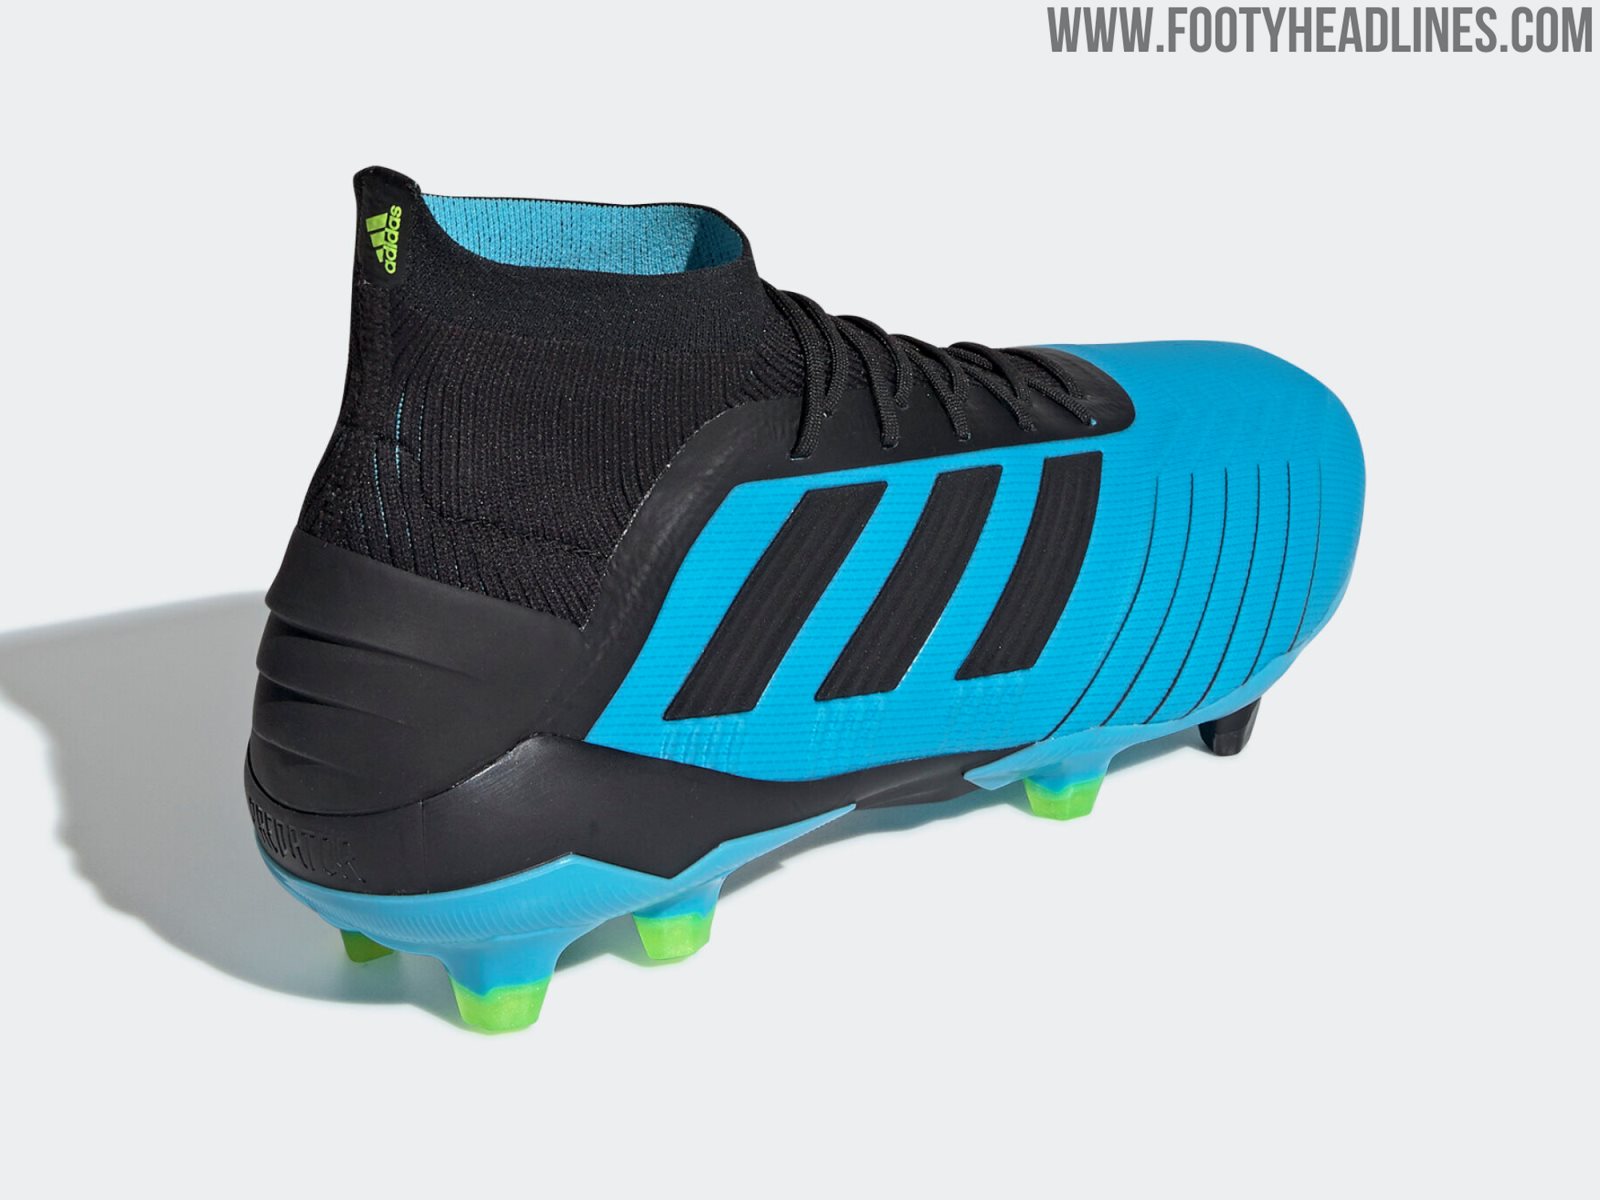 Bright Cyan Adidas Predator Wired' Boots Released - Footy Headlines